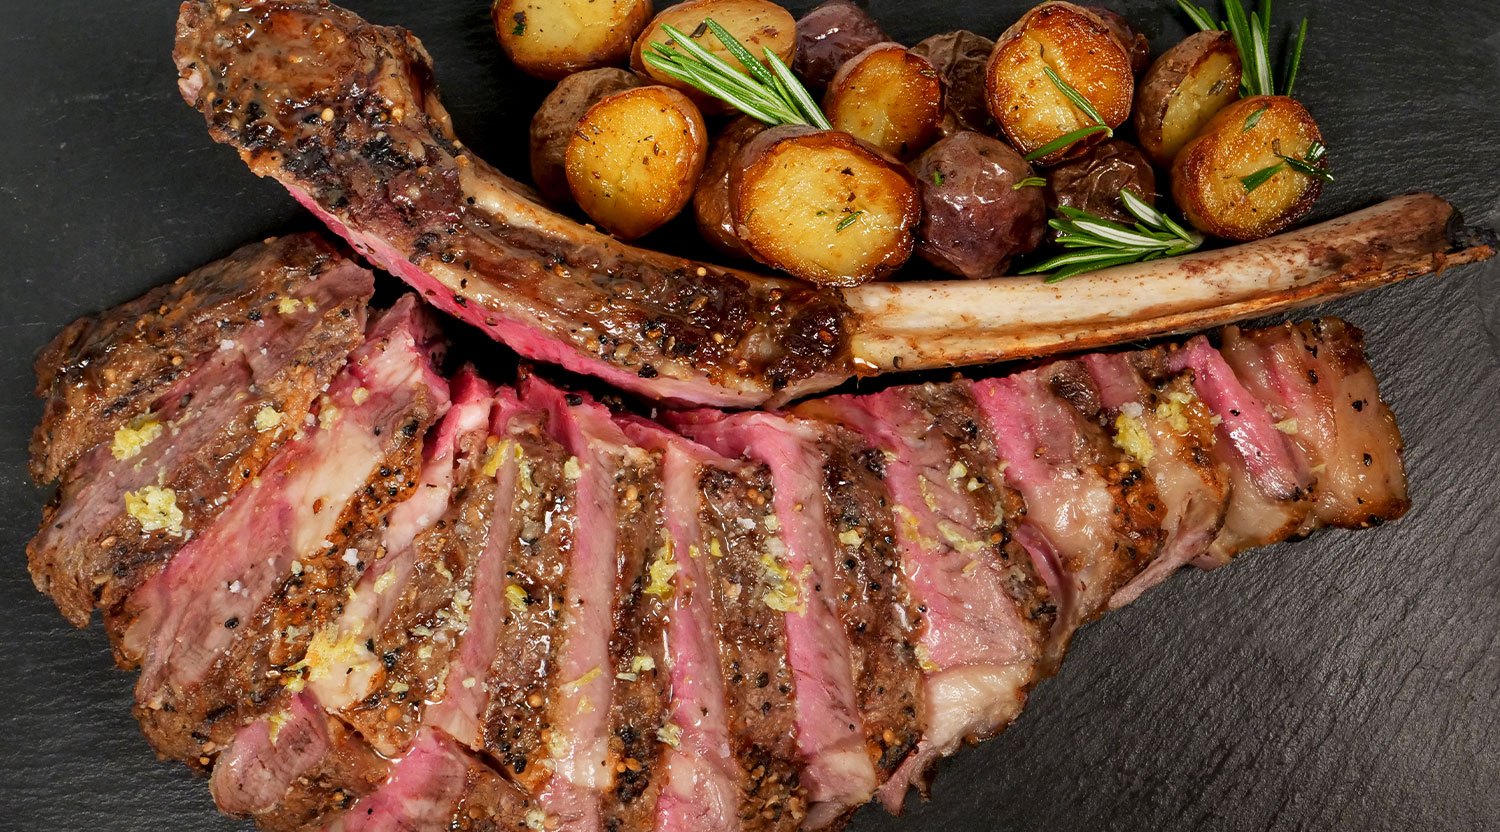 Frenched Bone-In Rib Steak with Garlic Flower Butter